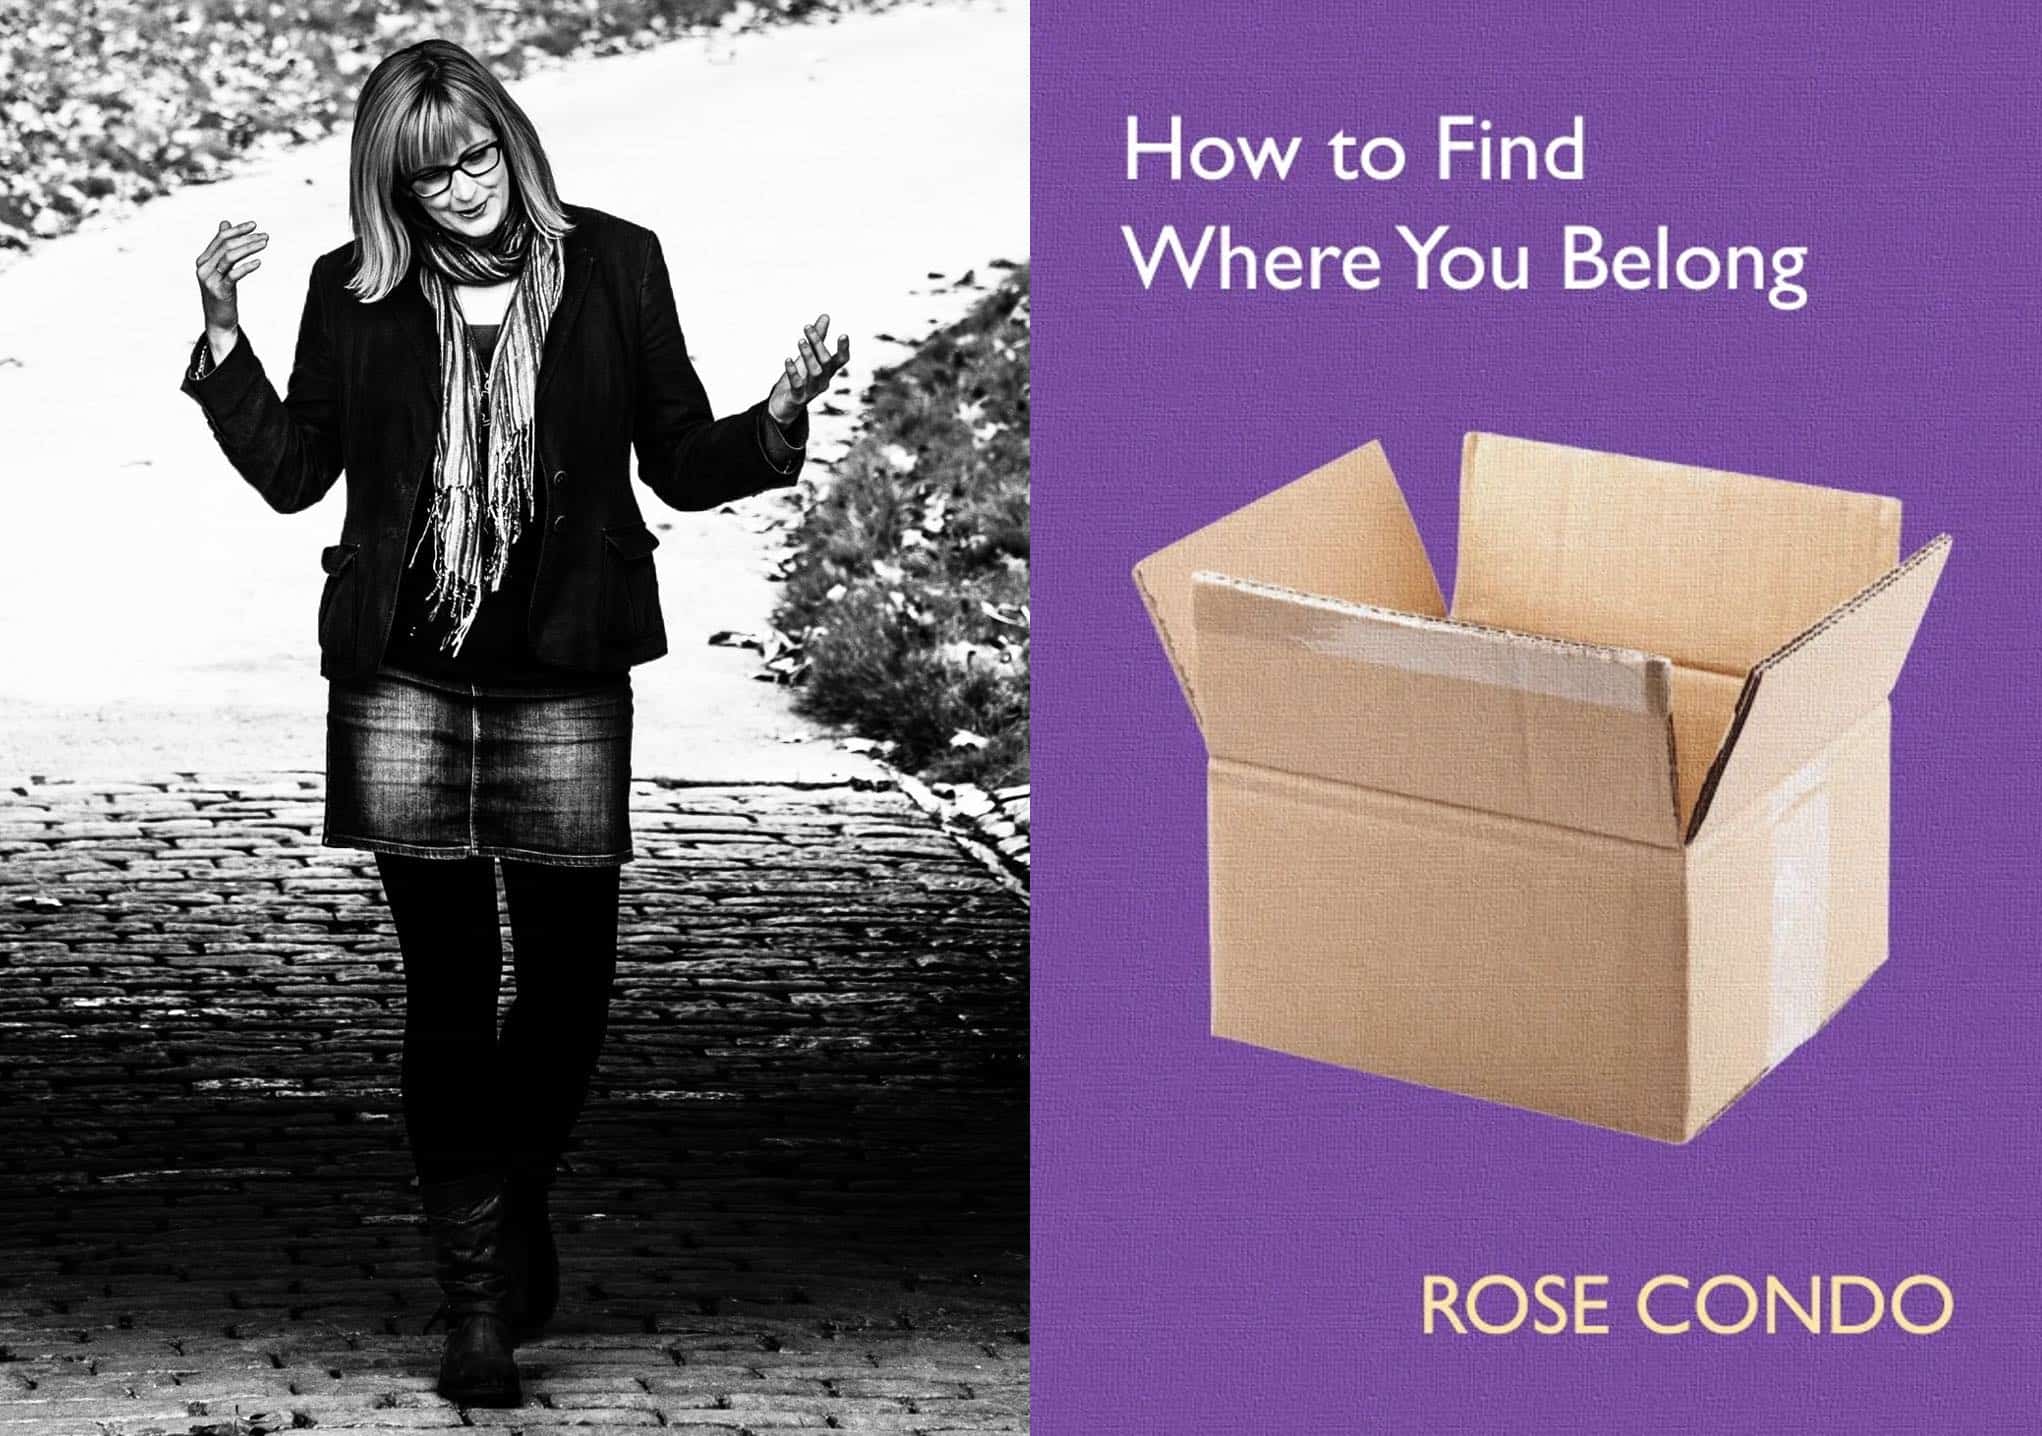 Rose Condo – How to Find Where You Belong